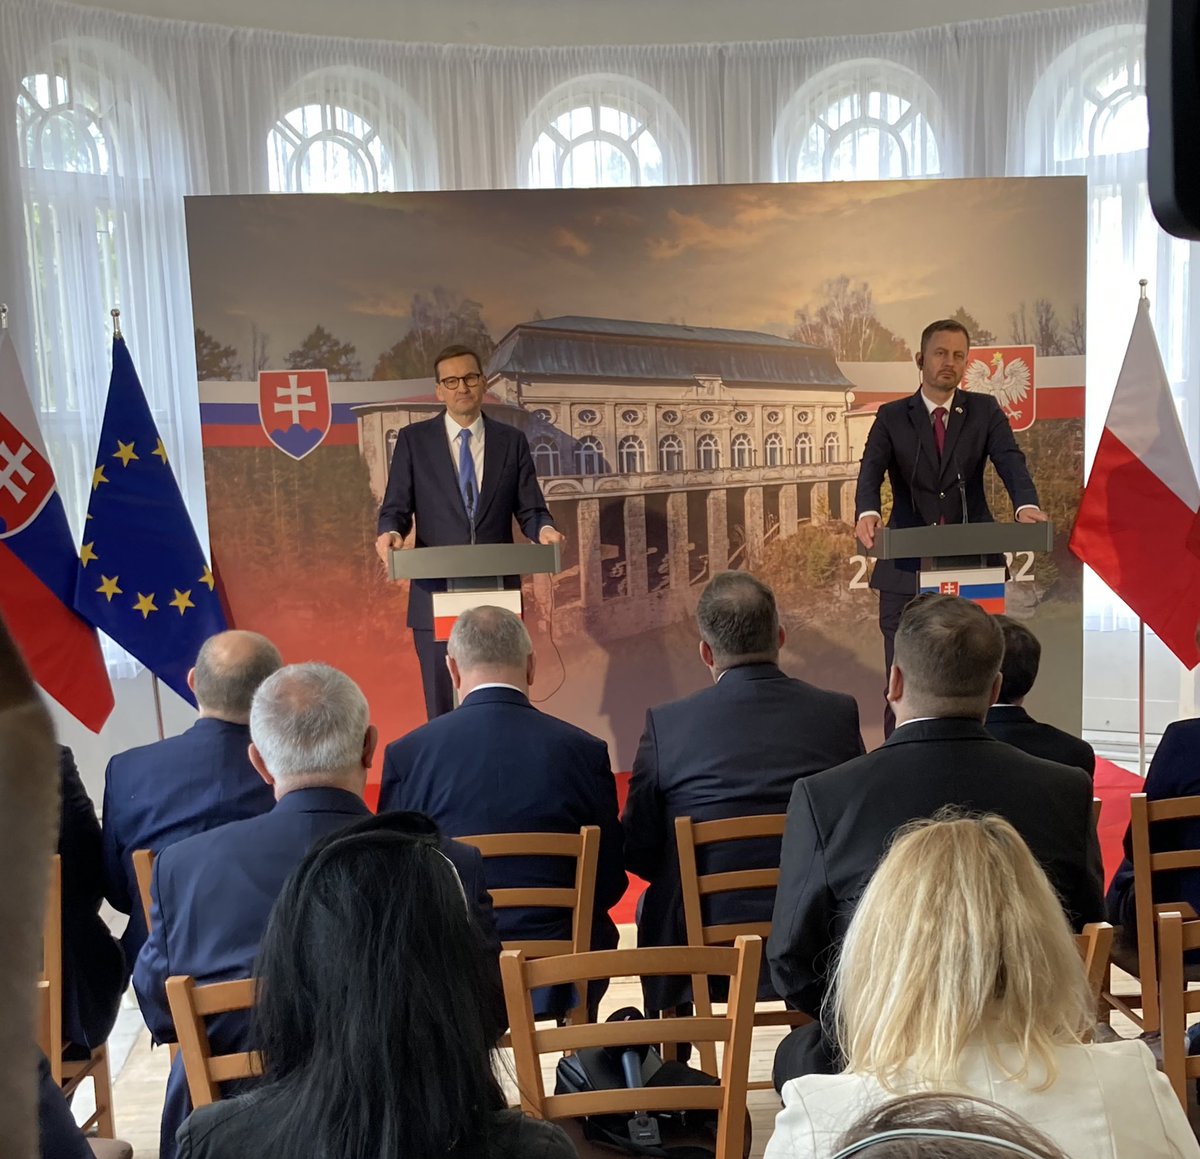 Poland's PM says that confiscating Russian assets in EU should be a source of additional funds for the reconstruction of Ukraine and aid for refugees.   He asks EU: do you want to return this frozen property to the Russians, after the crimes that happened It would be immoral